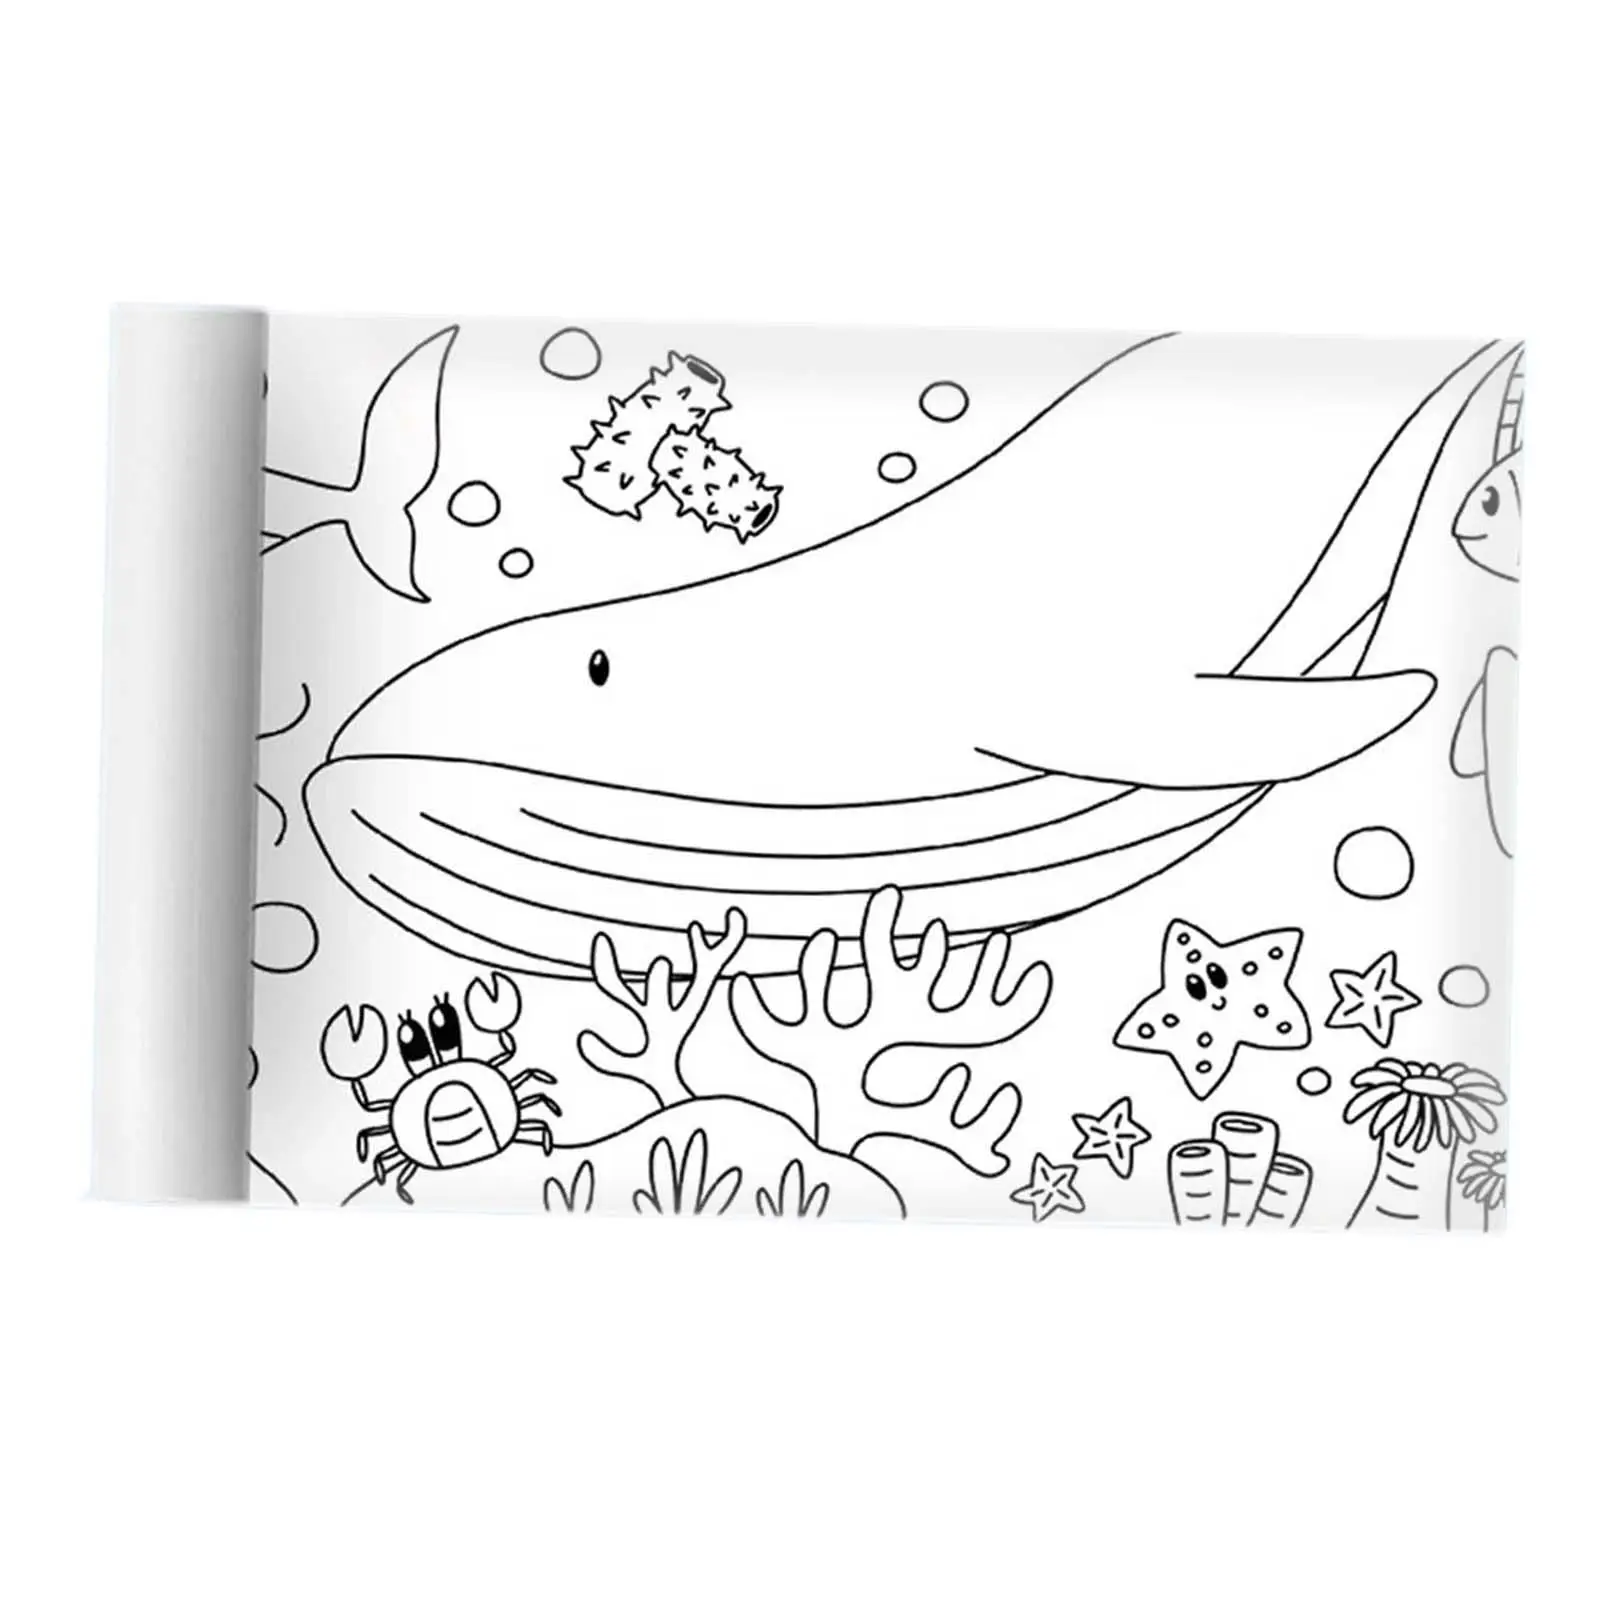 Coloring Paper Roll Wall Coloring Paper Coloring Books Art Paper Crafts for Home Birthday Party Children Toddler Gift